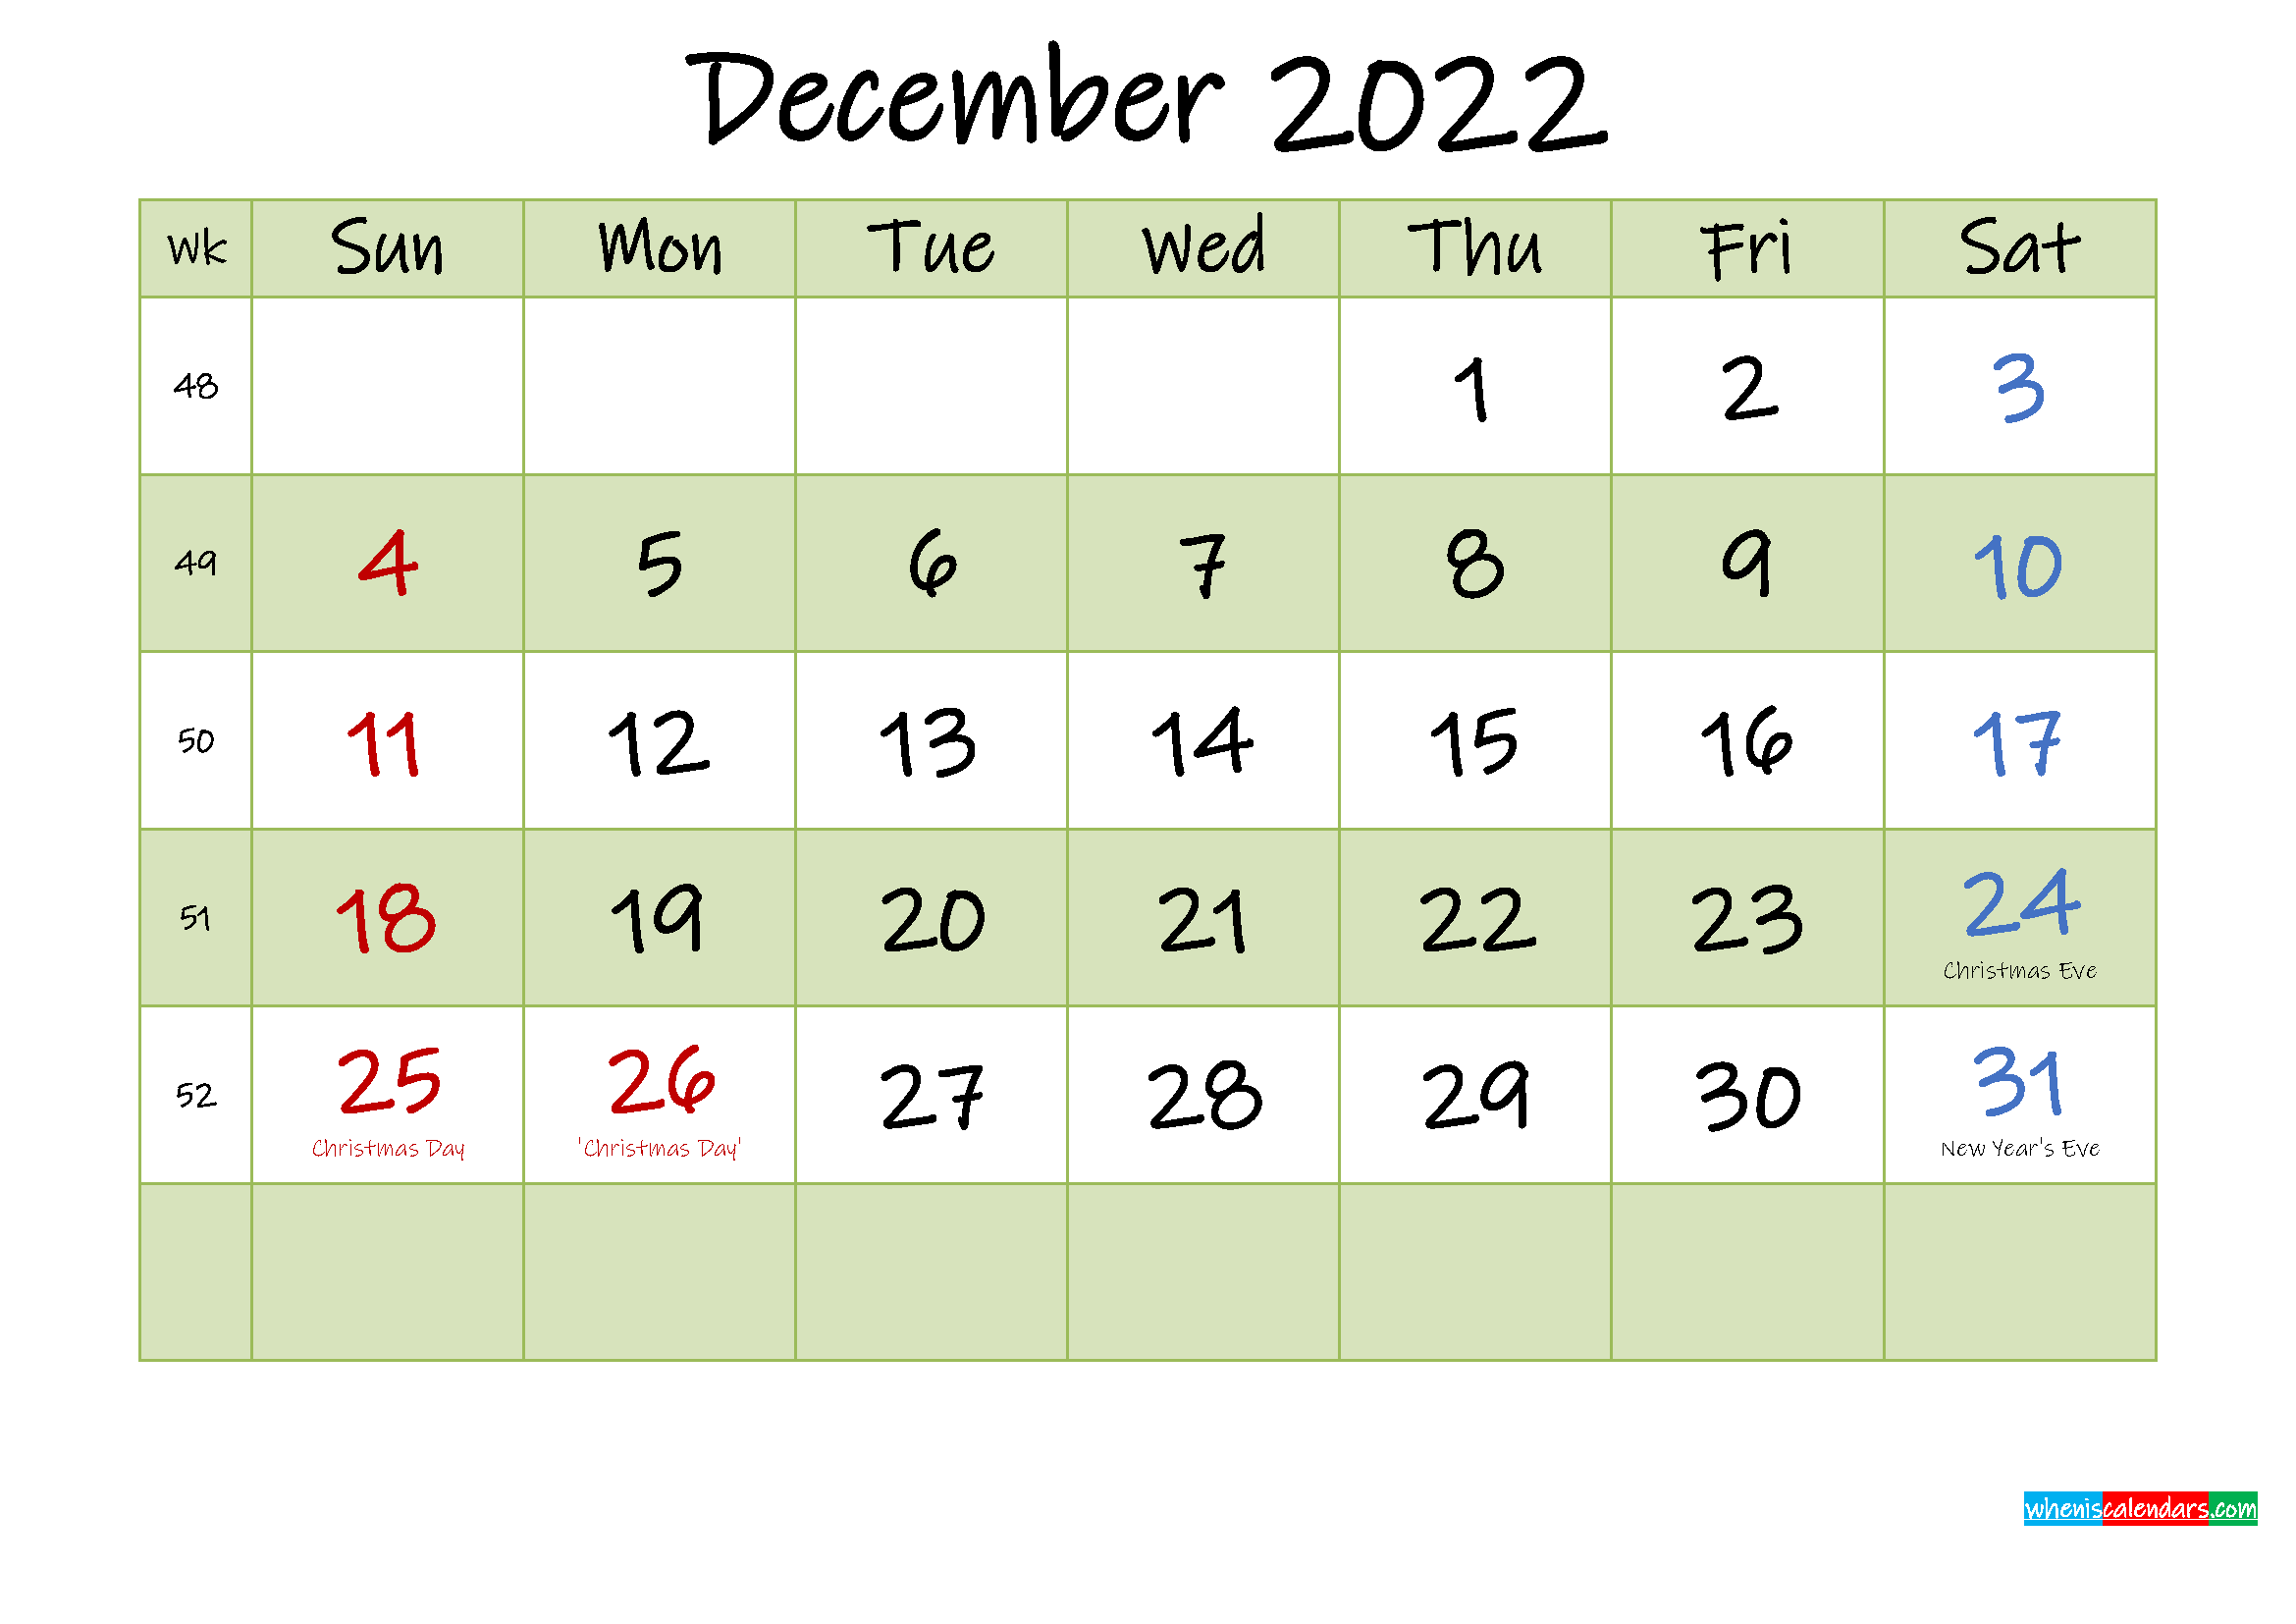 December 2022 Calendar With Holidays Printable Template No ink22m456